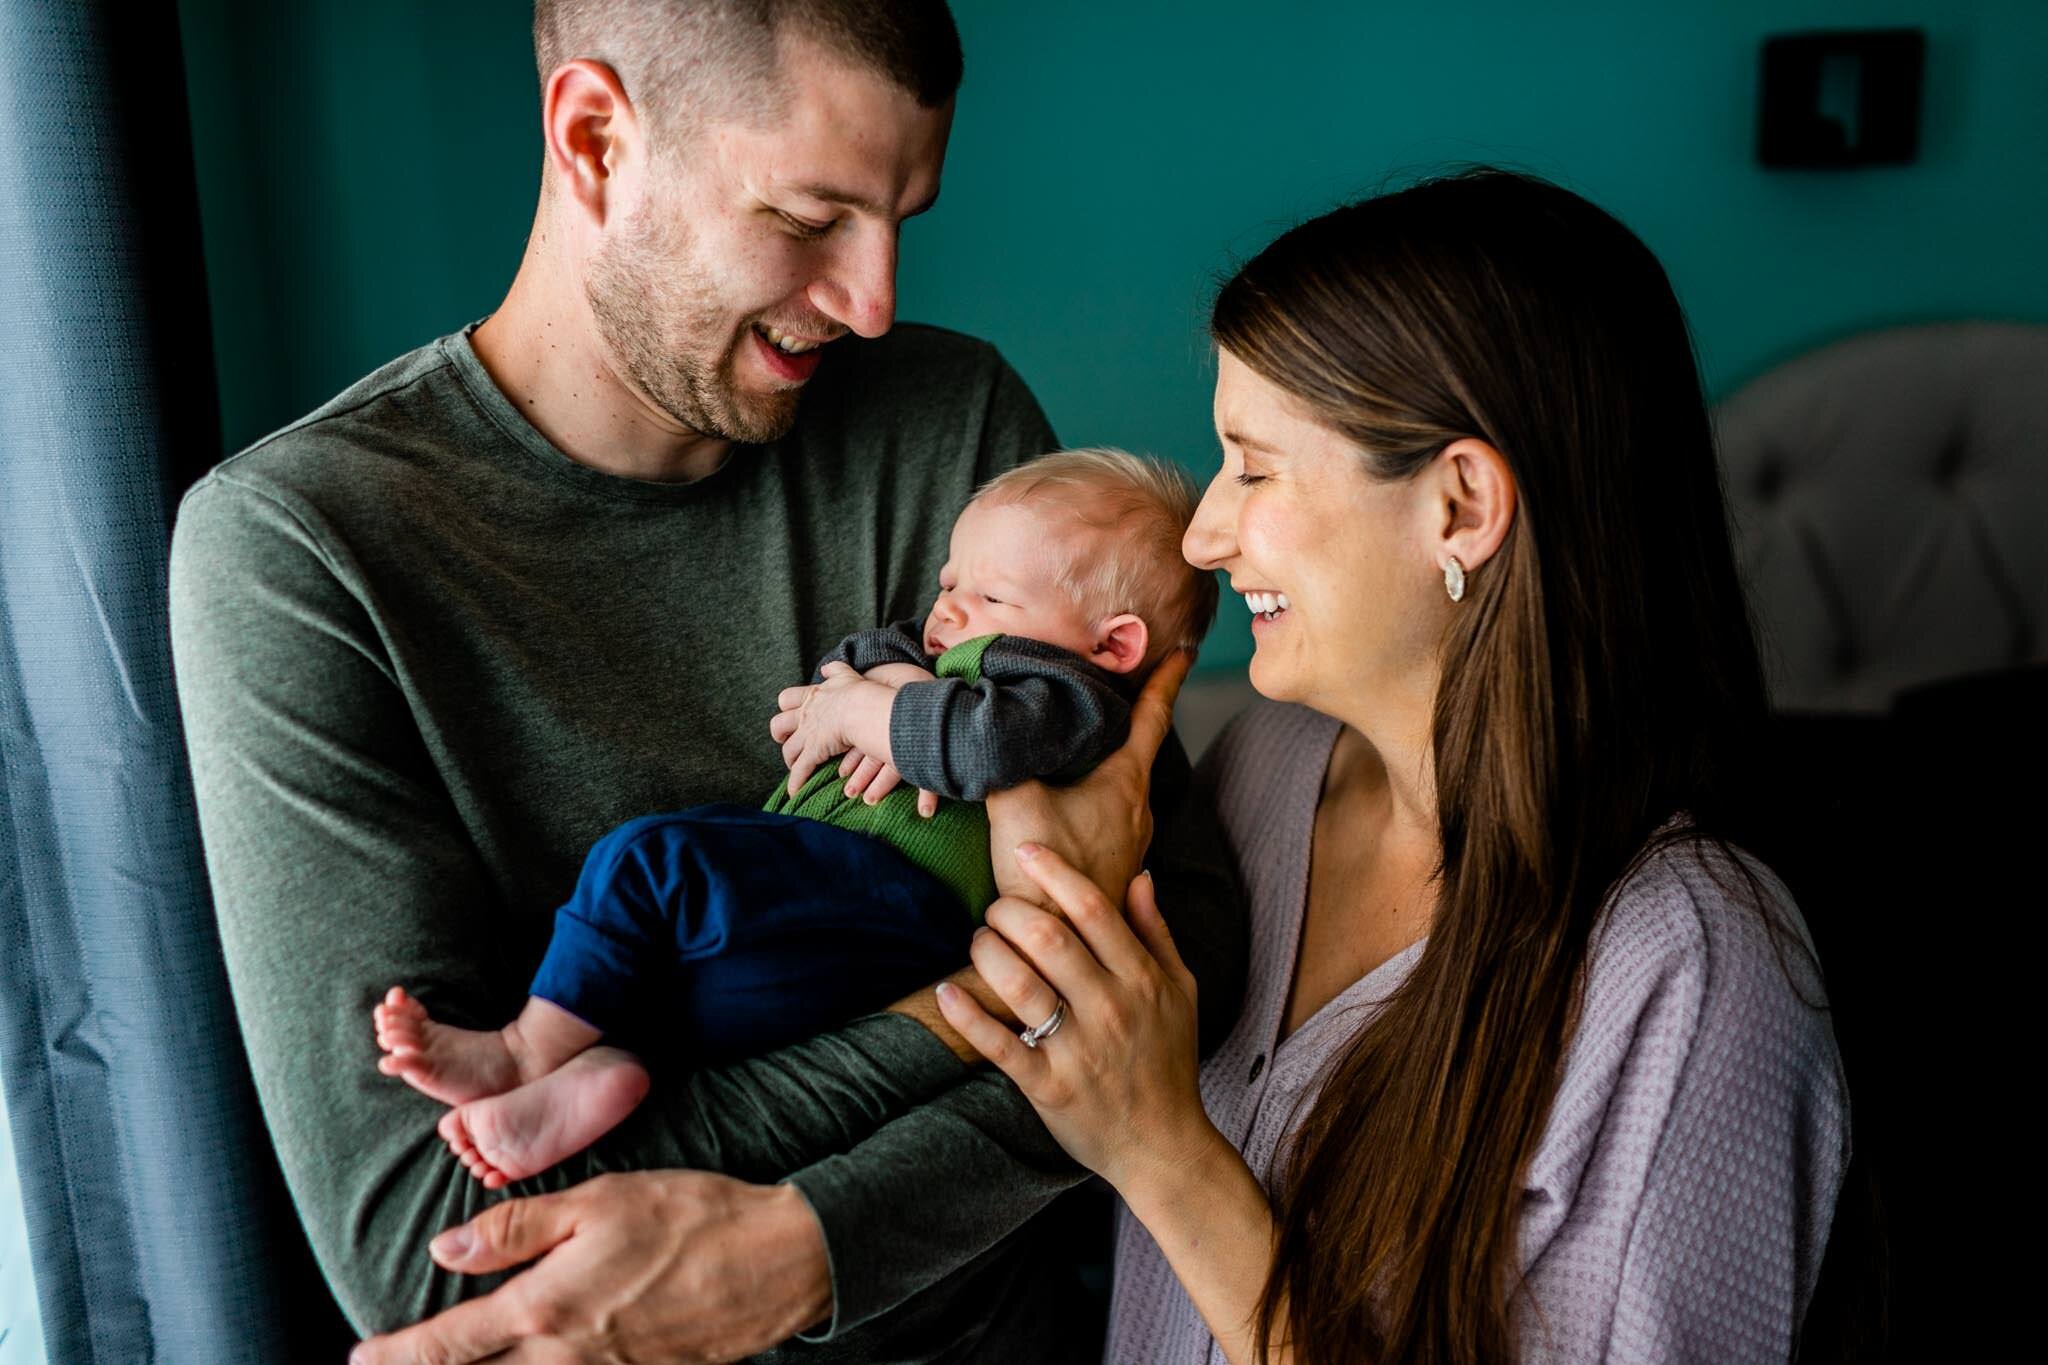 Durham Newborn Photographer | By G. Lin Photography | Father and mother holding baby and standing by window light